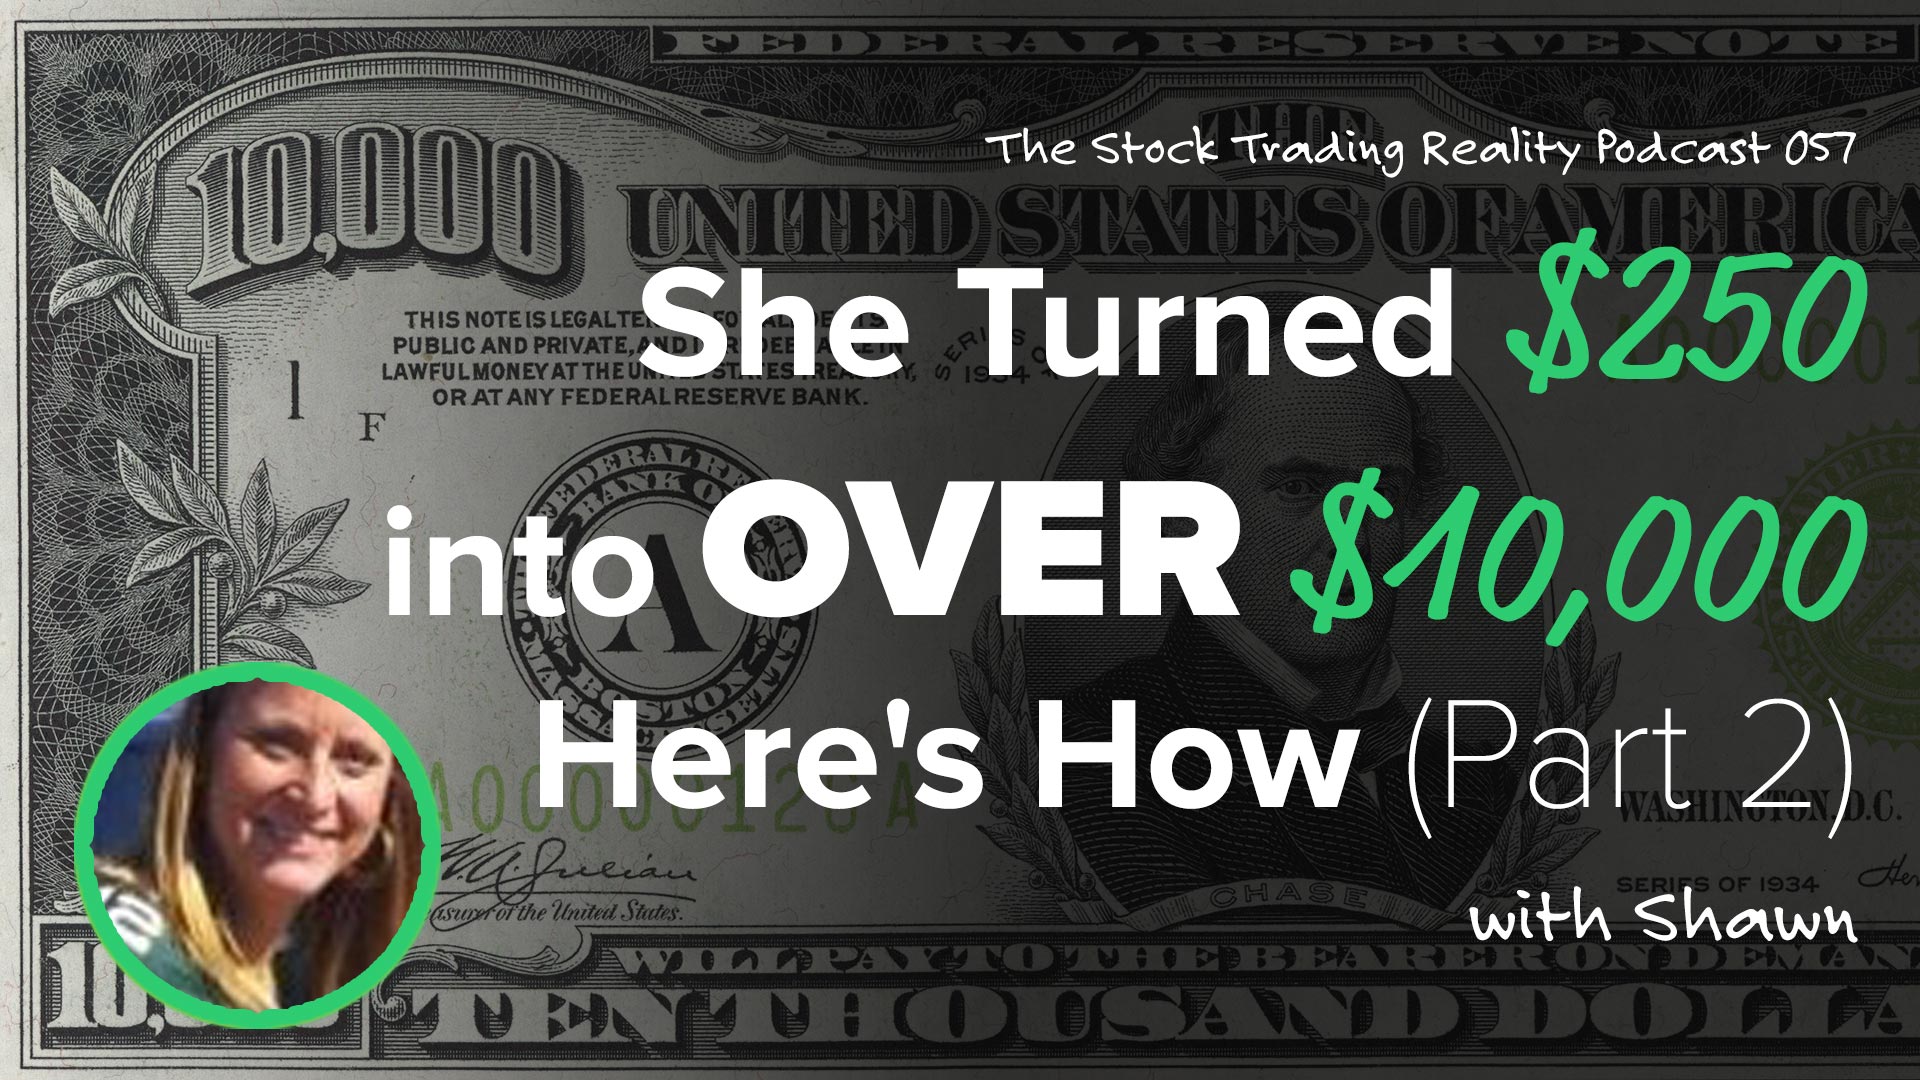 She Turned $250 into Over $10,000. Here's How. (part 2)